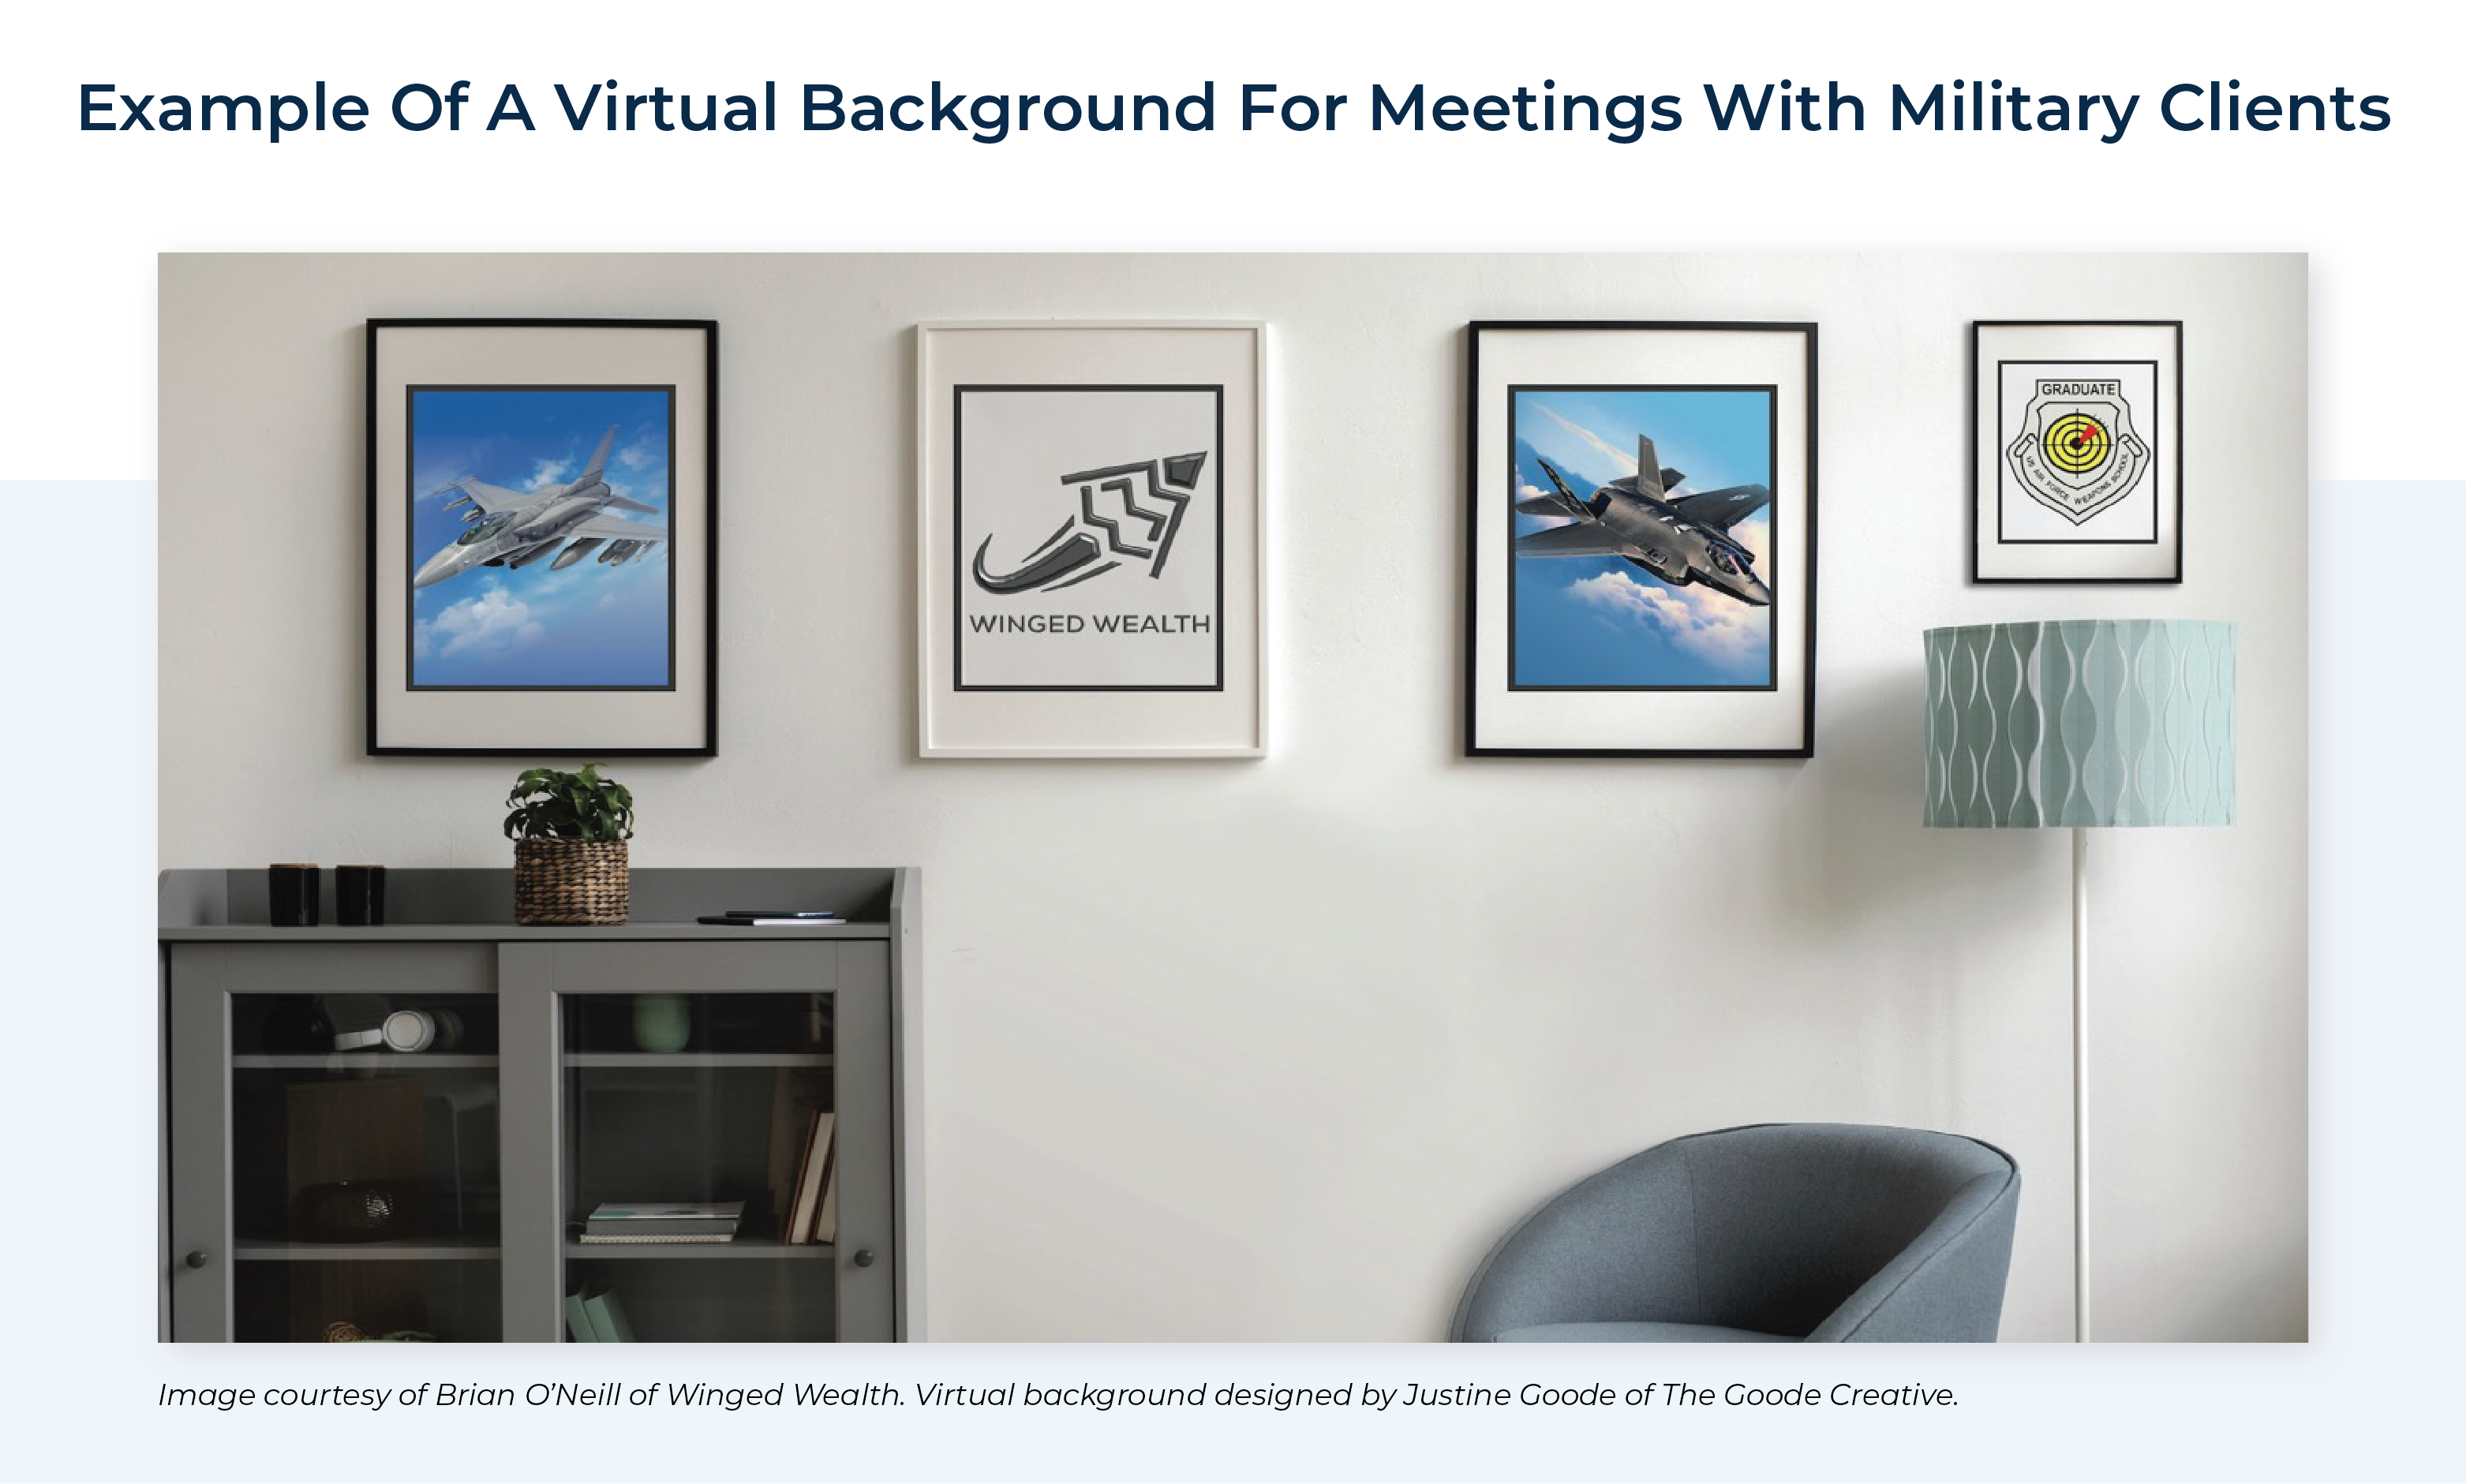 Example Of A Virtual Background For Meetings With Military Clients